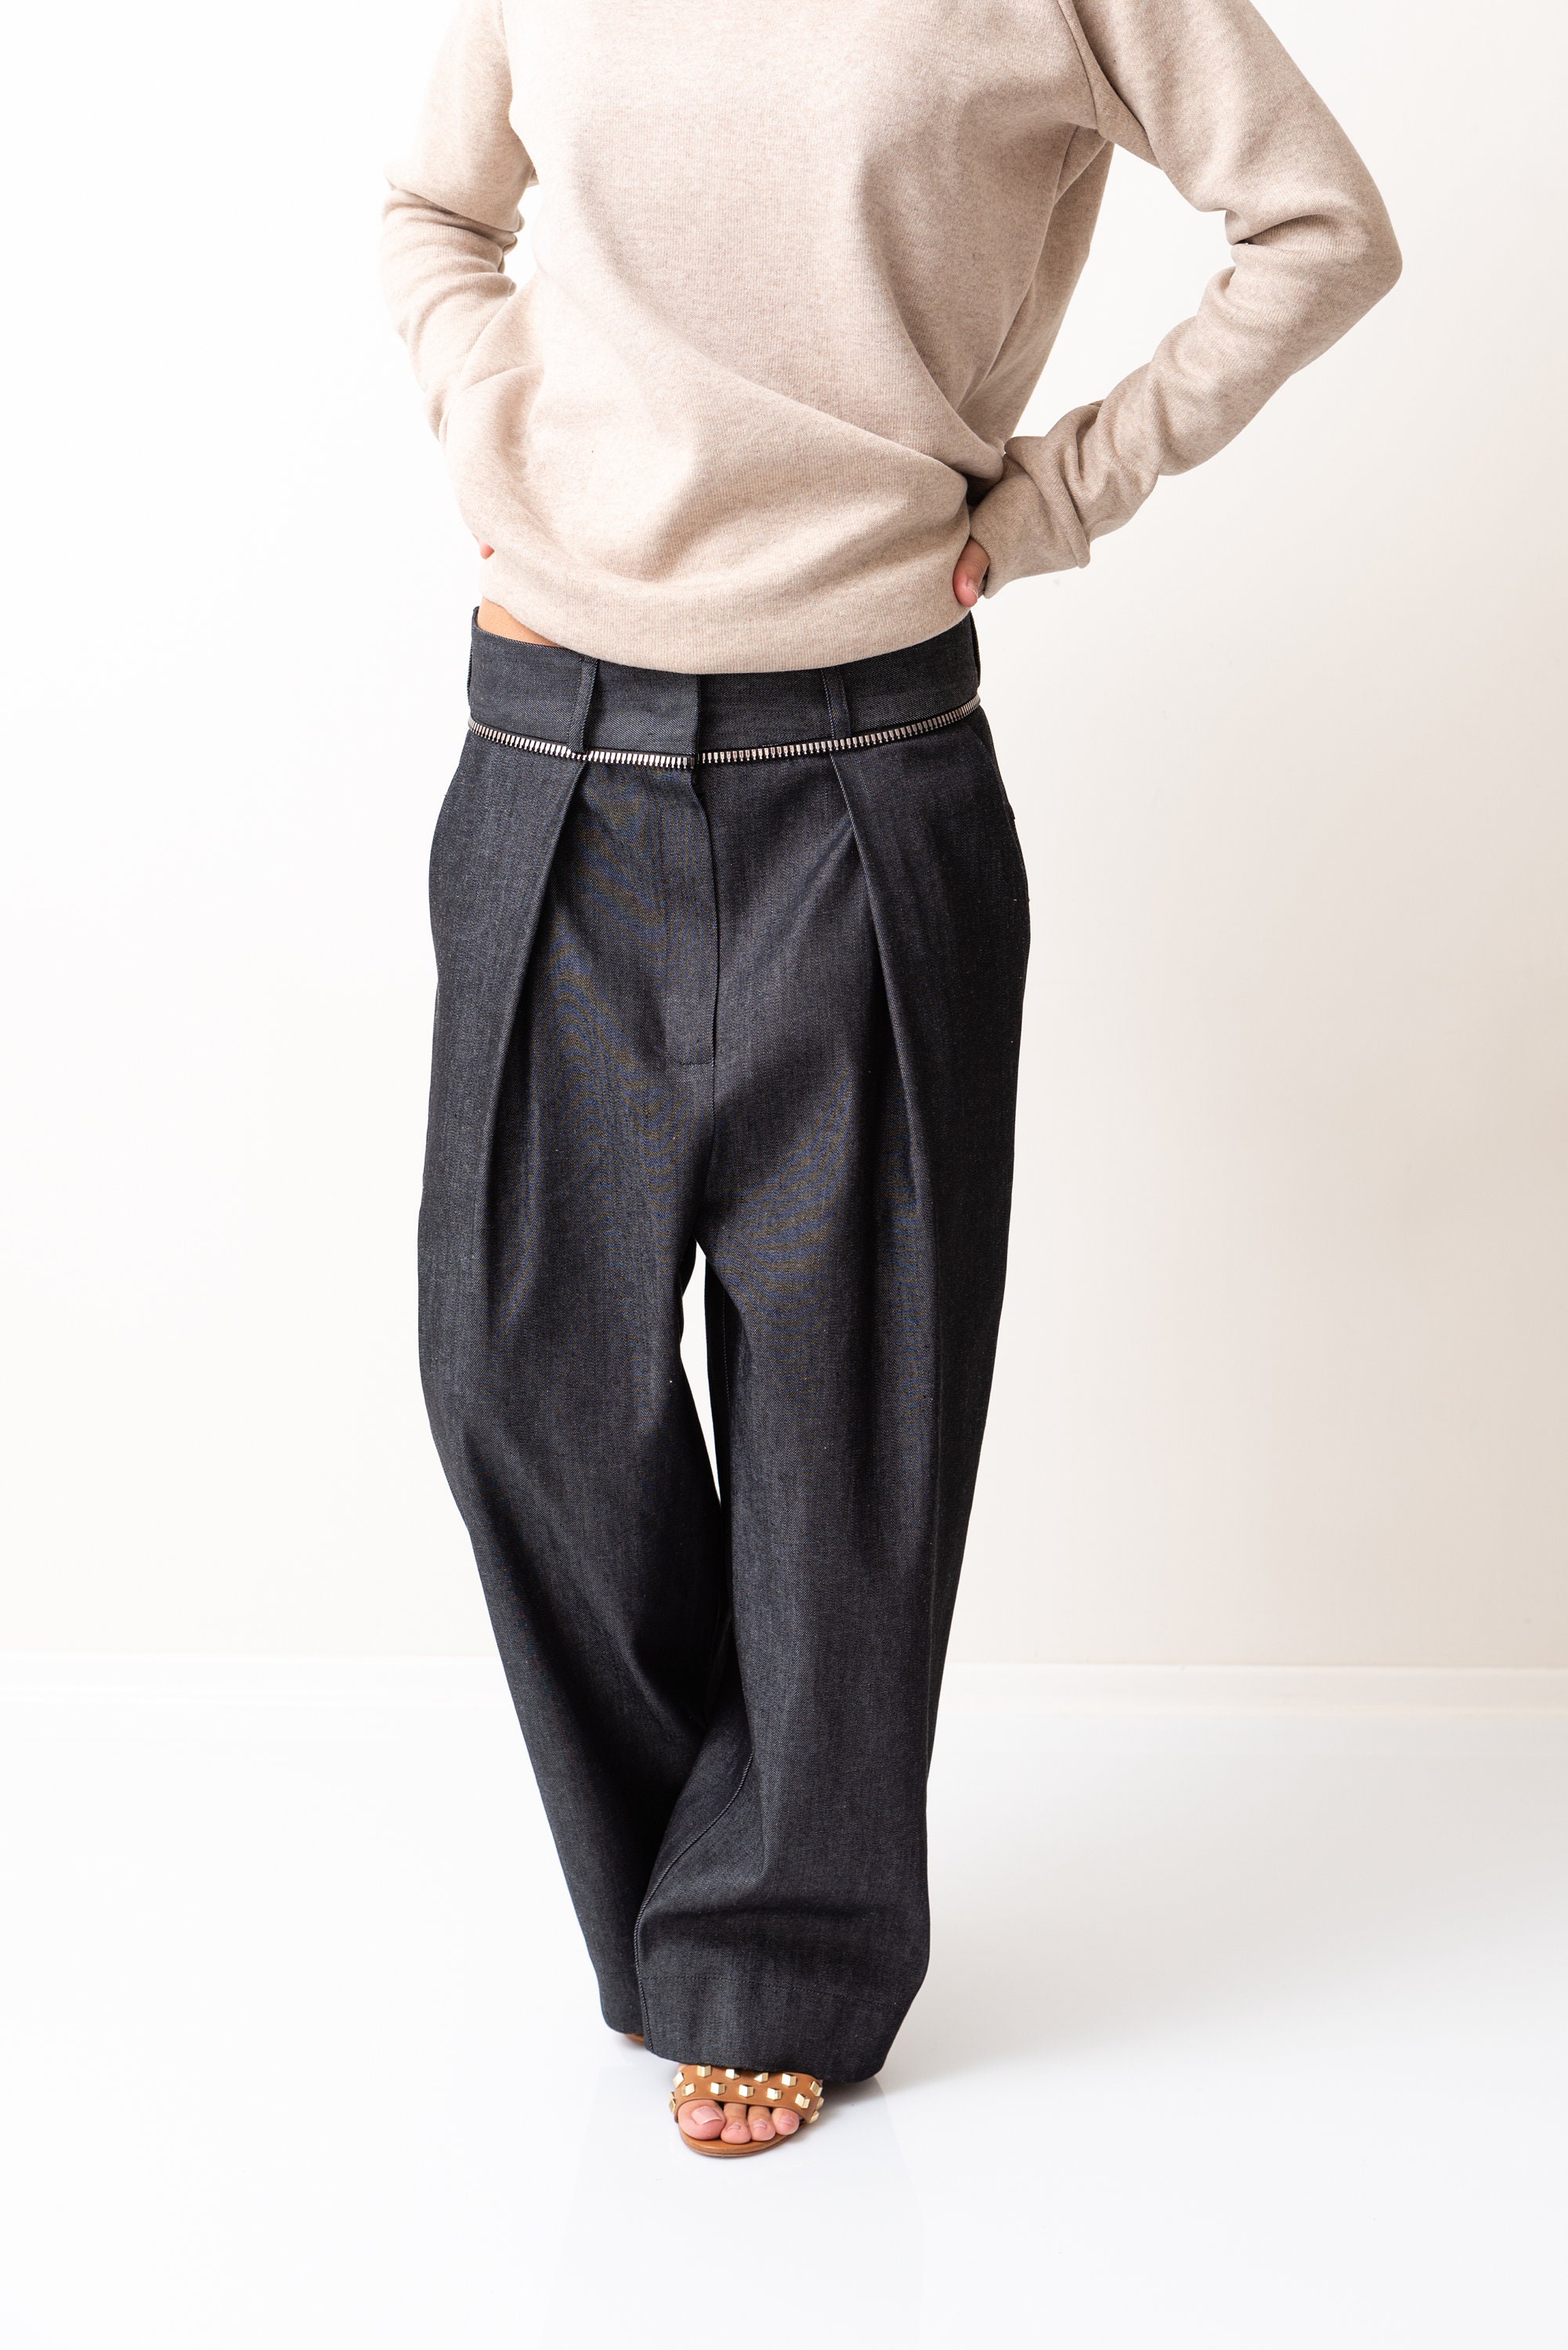 Loose Casual Drop Crotch Harem Pants Fall Winter Collection - Etsy